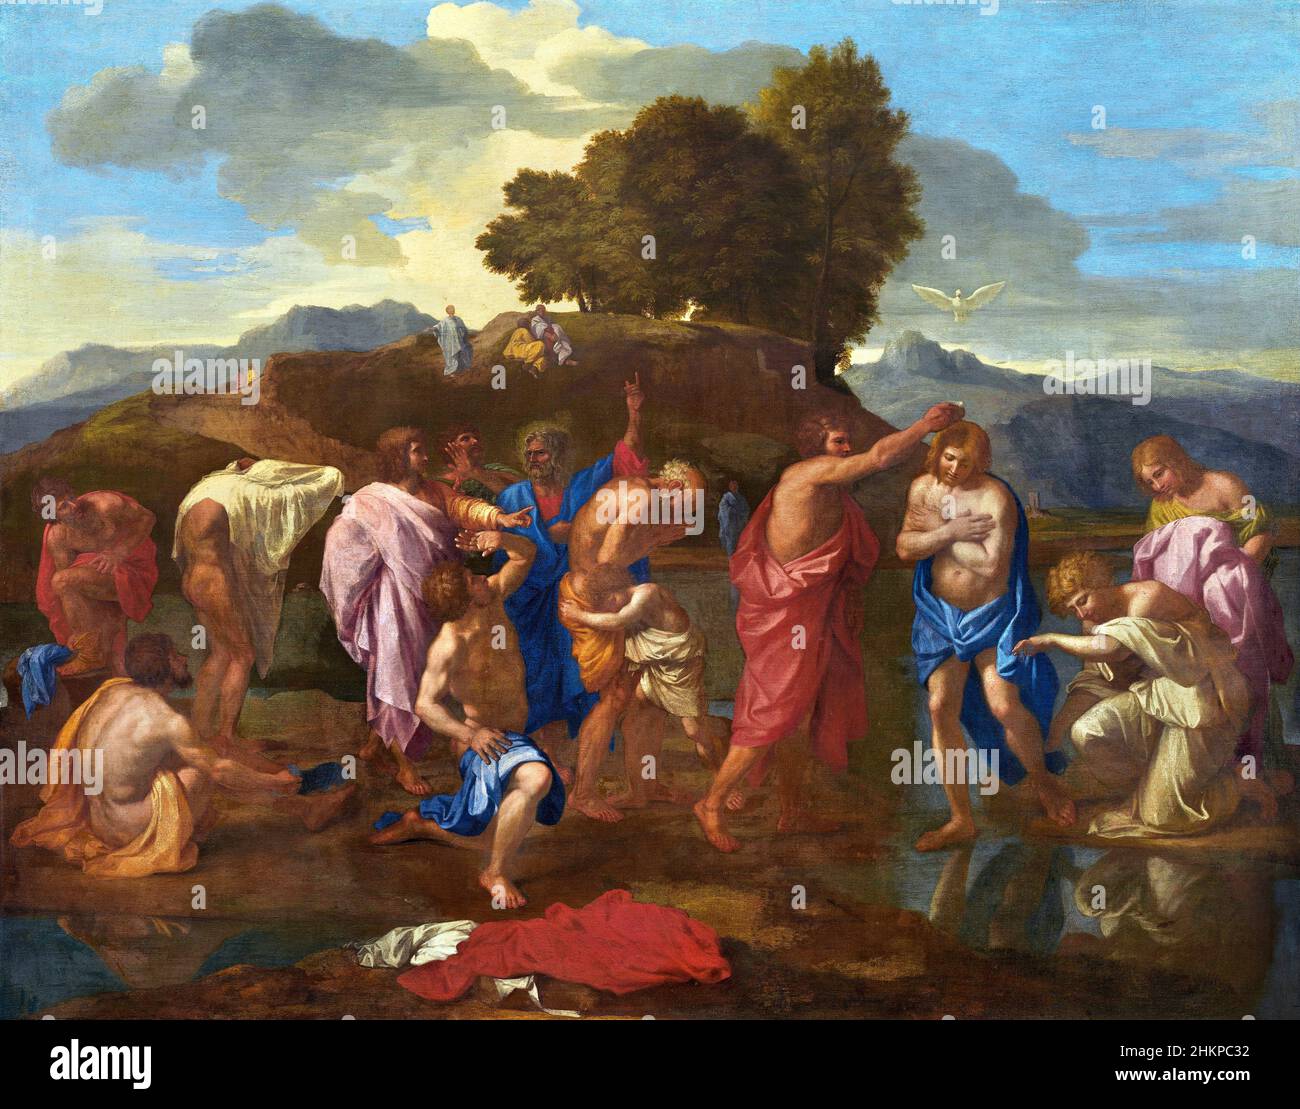 The Baptism of Christ by Nicolas Poussin, oil on canvas, 1641/42 Stock Photo